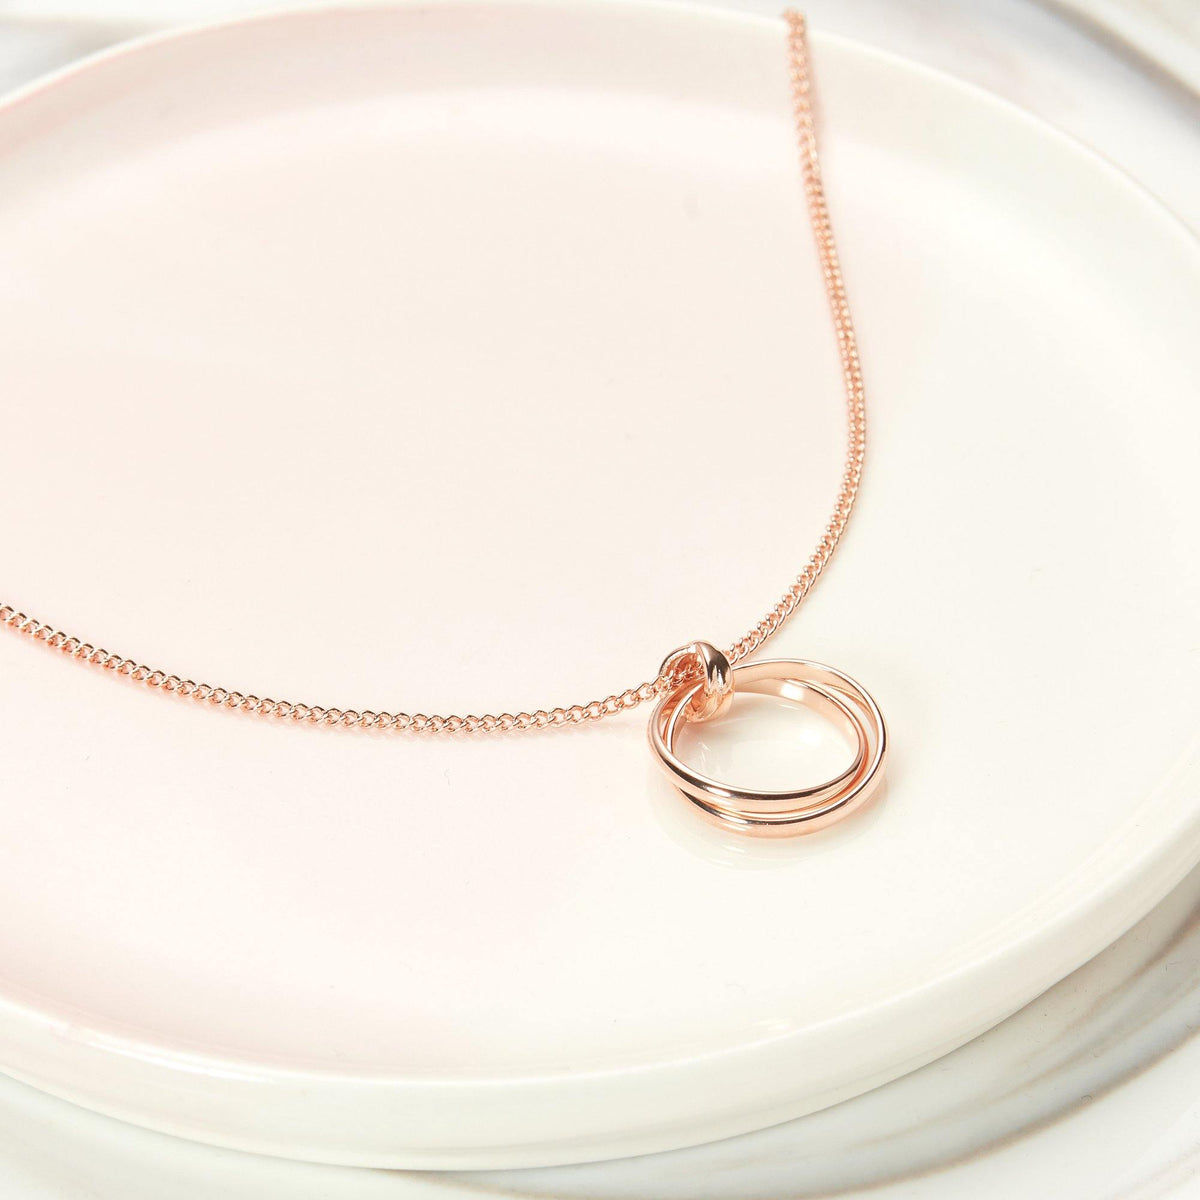 Gift for Girlfriend Necklace - Dear Ava, Jewelry / Necklaces / Pendants